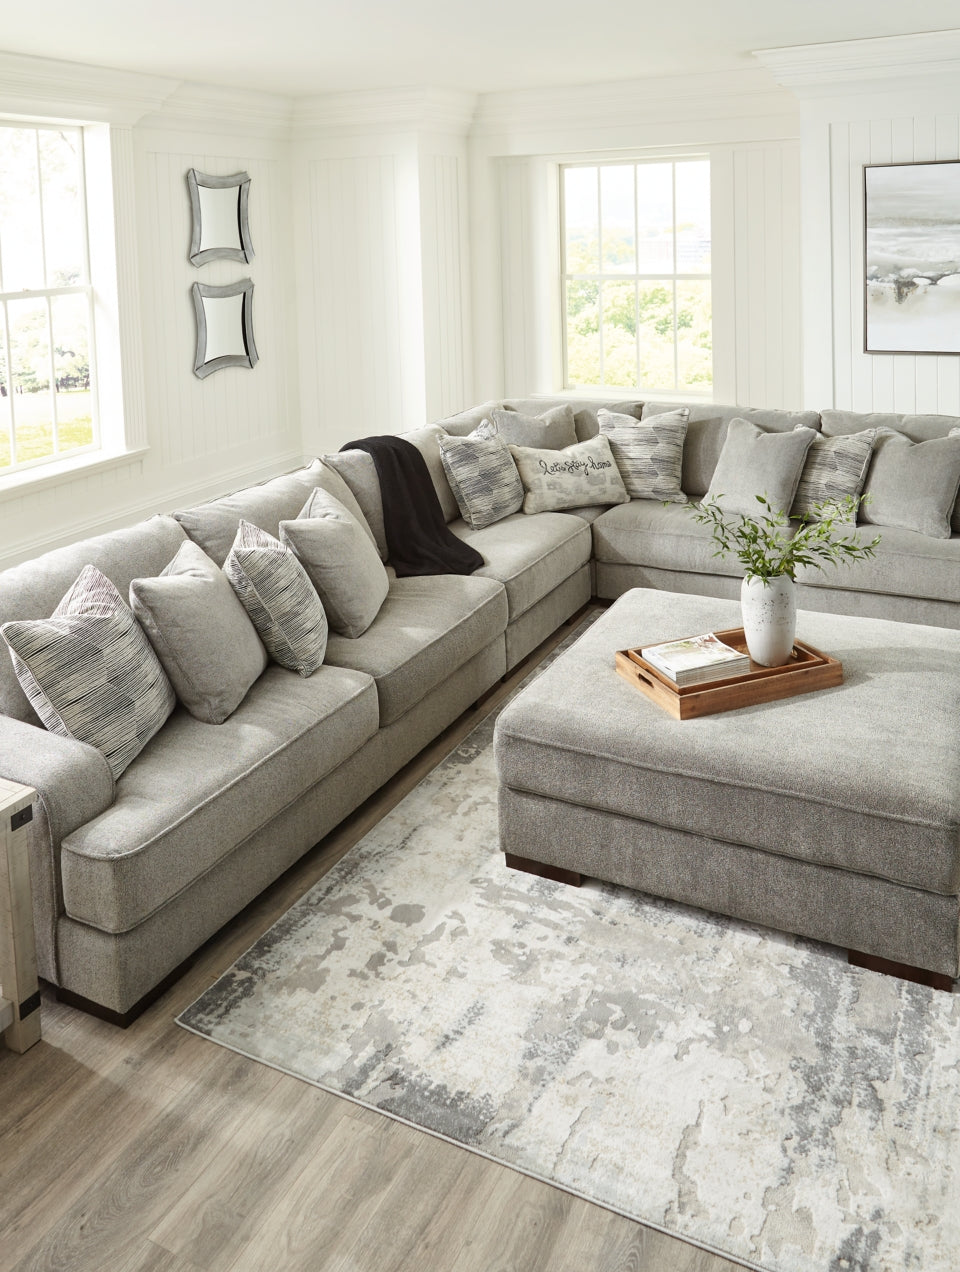 Bayless 4-Piece Sectional with Ottoman - furniture place usa